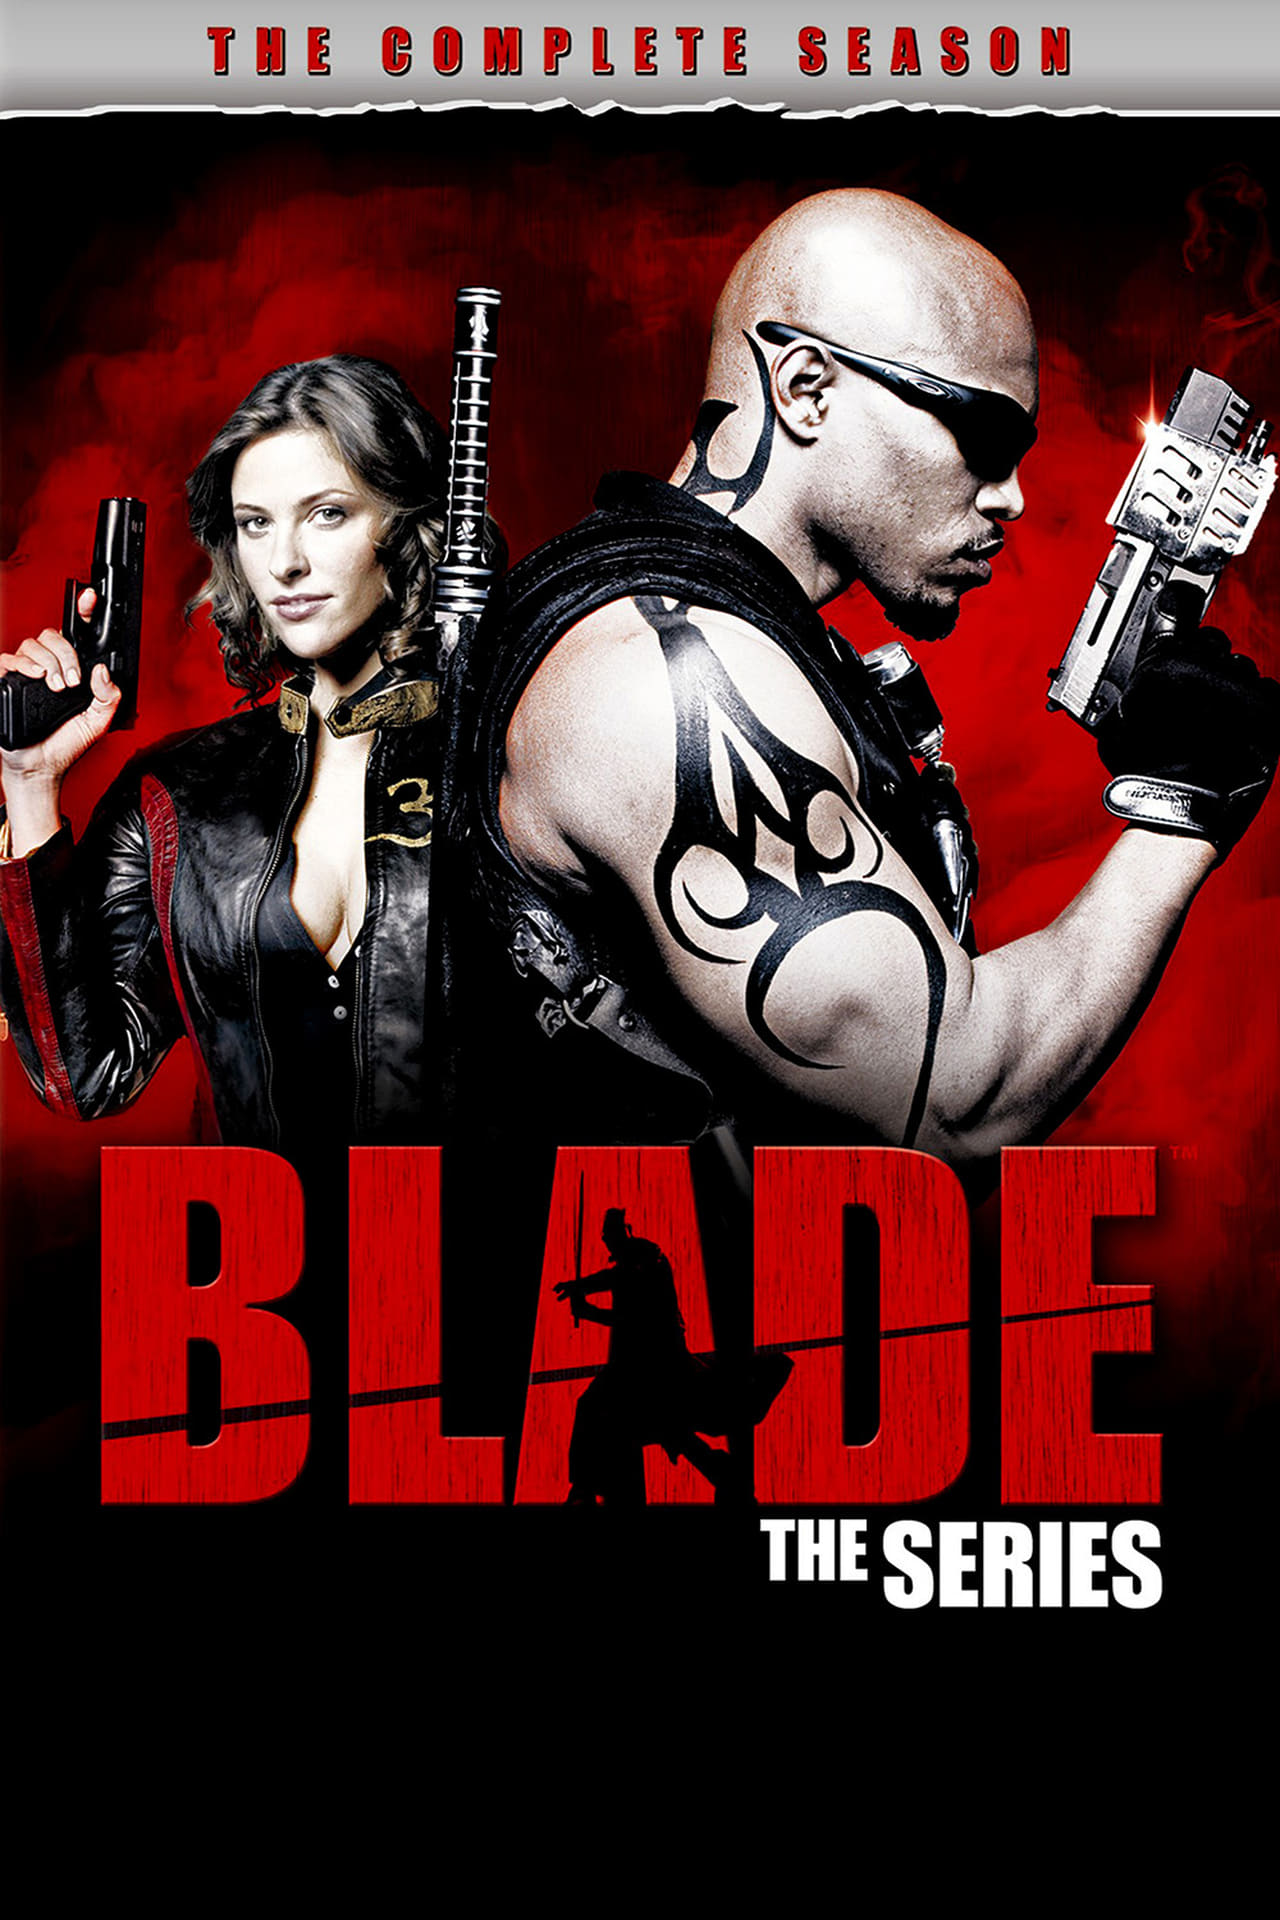 Blade: The Series (2006)